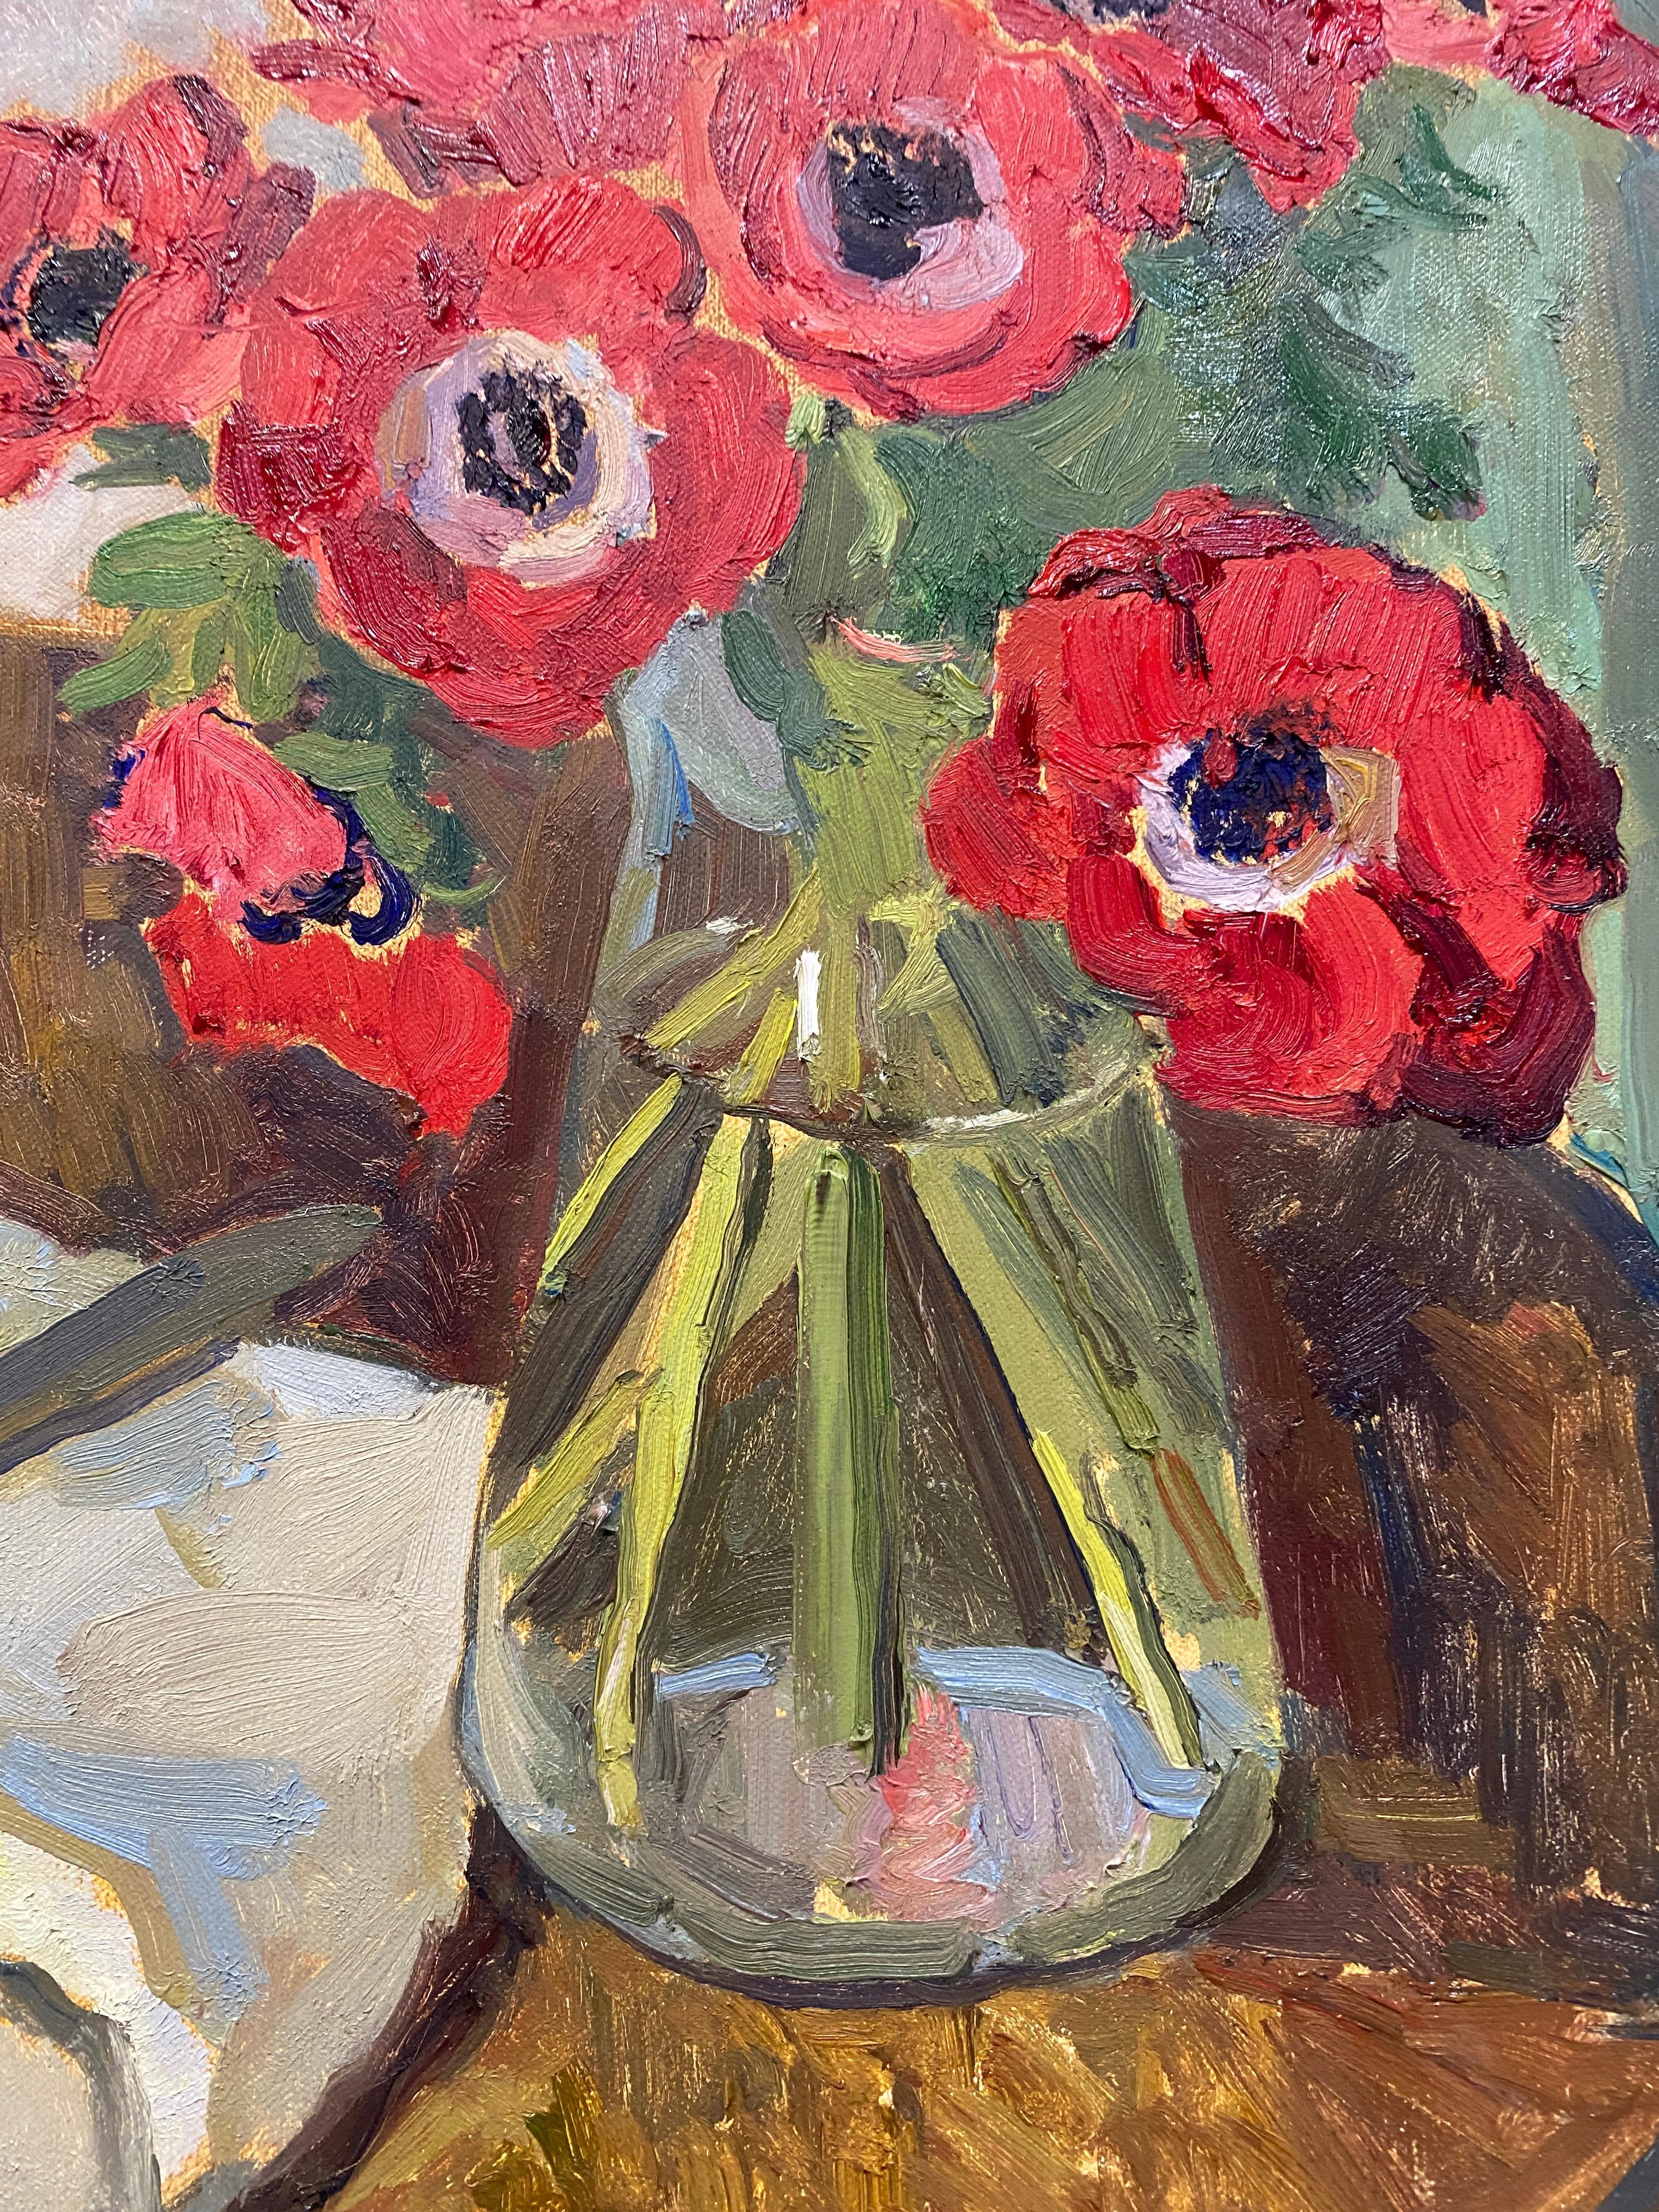 A still life painting of red anemones in a glass vessel, situated on a small round wooden table. A butter knife rests upon neutral toned fabric. A green drape with red fringe trim hangs in the background. 

Framed in a white wood frame.

Framed